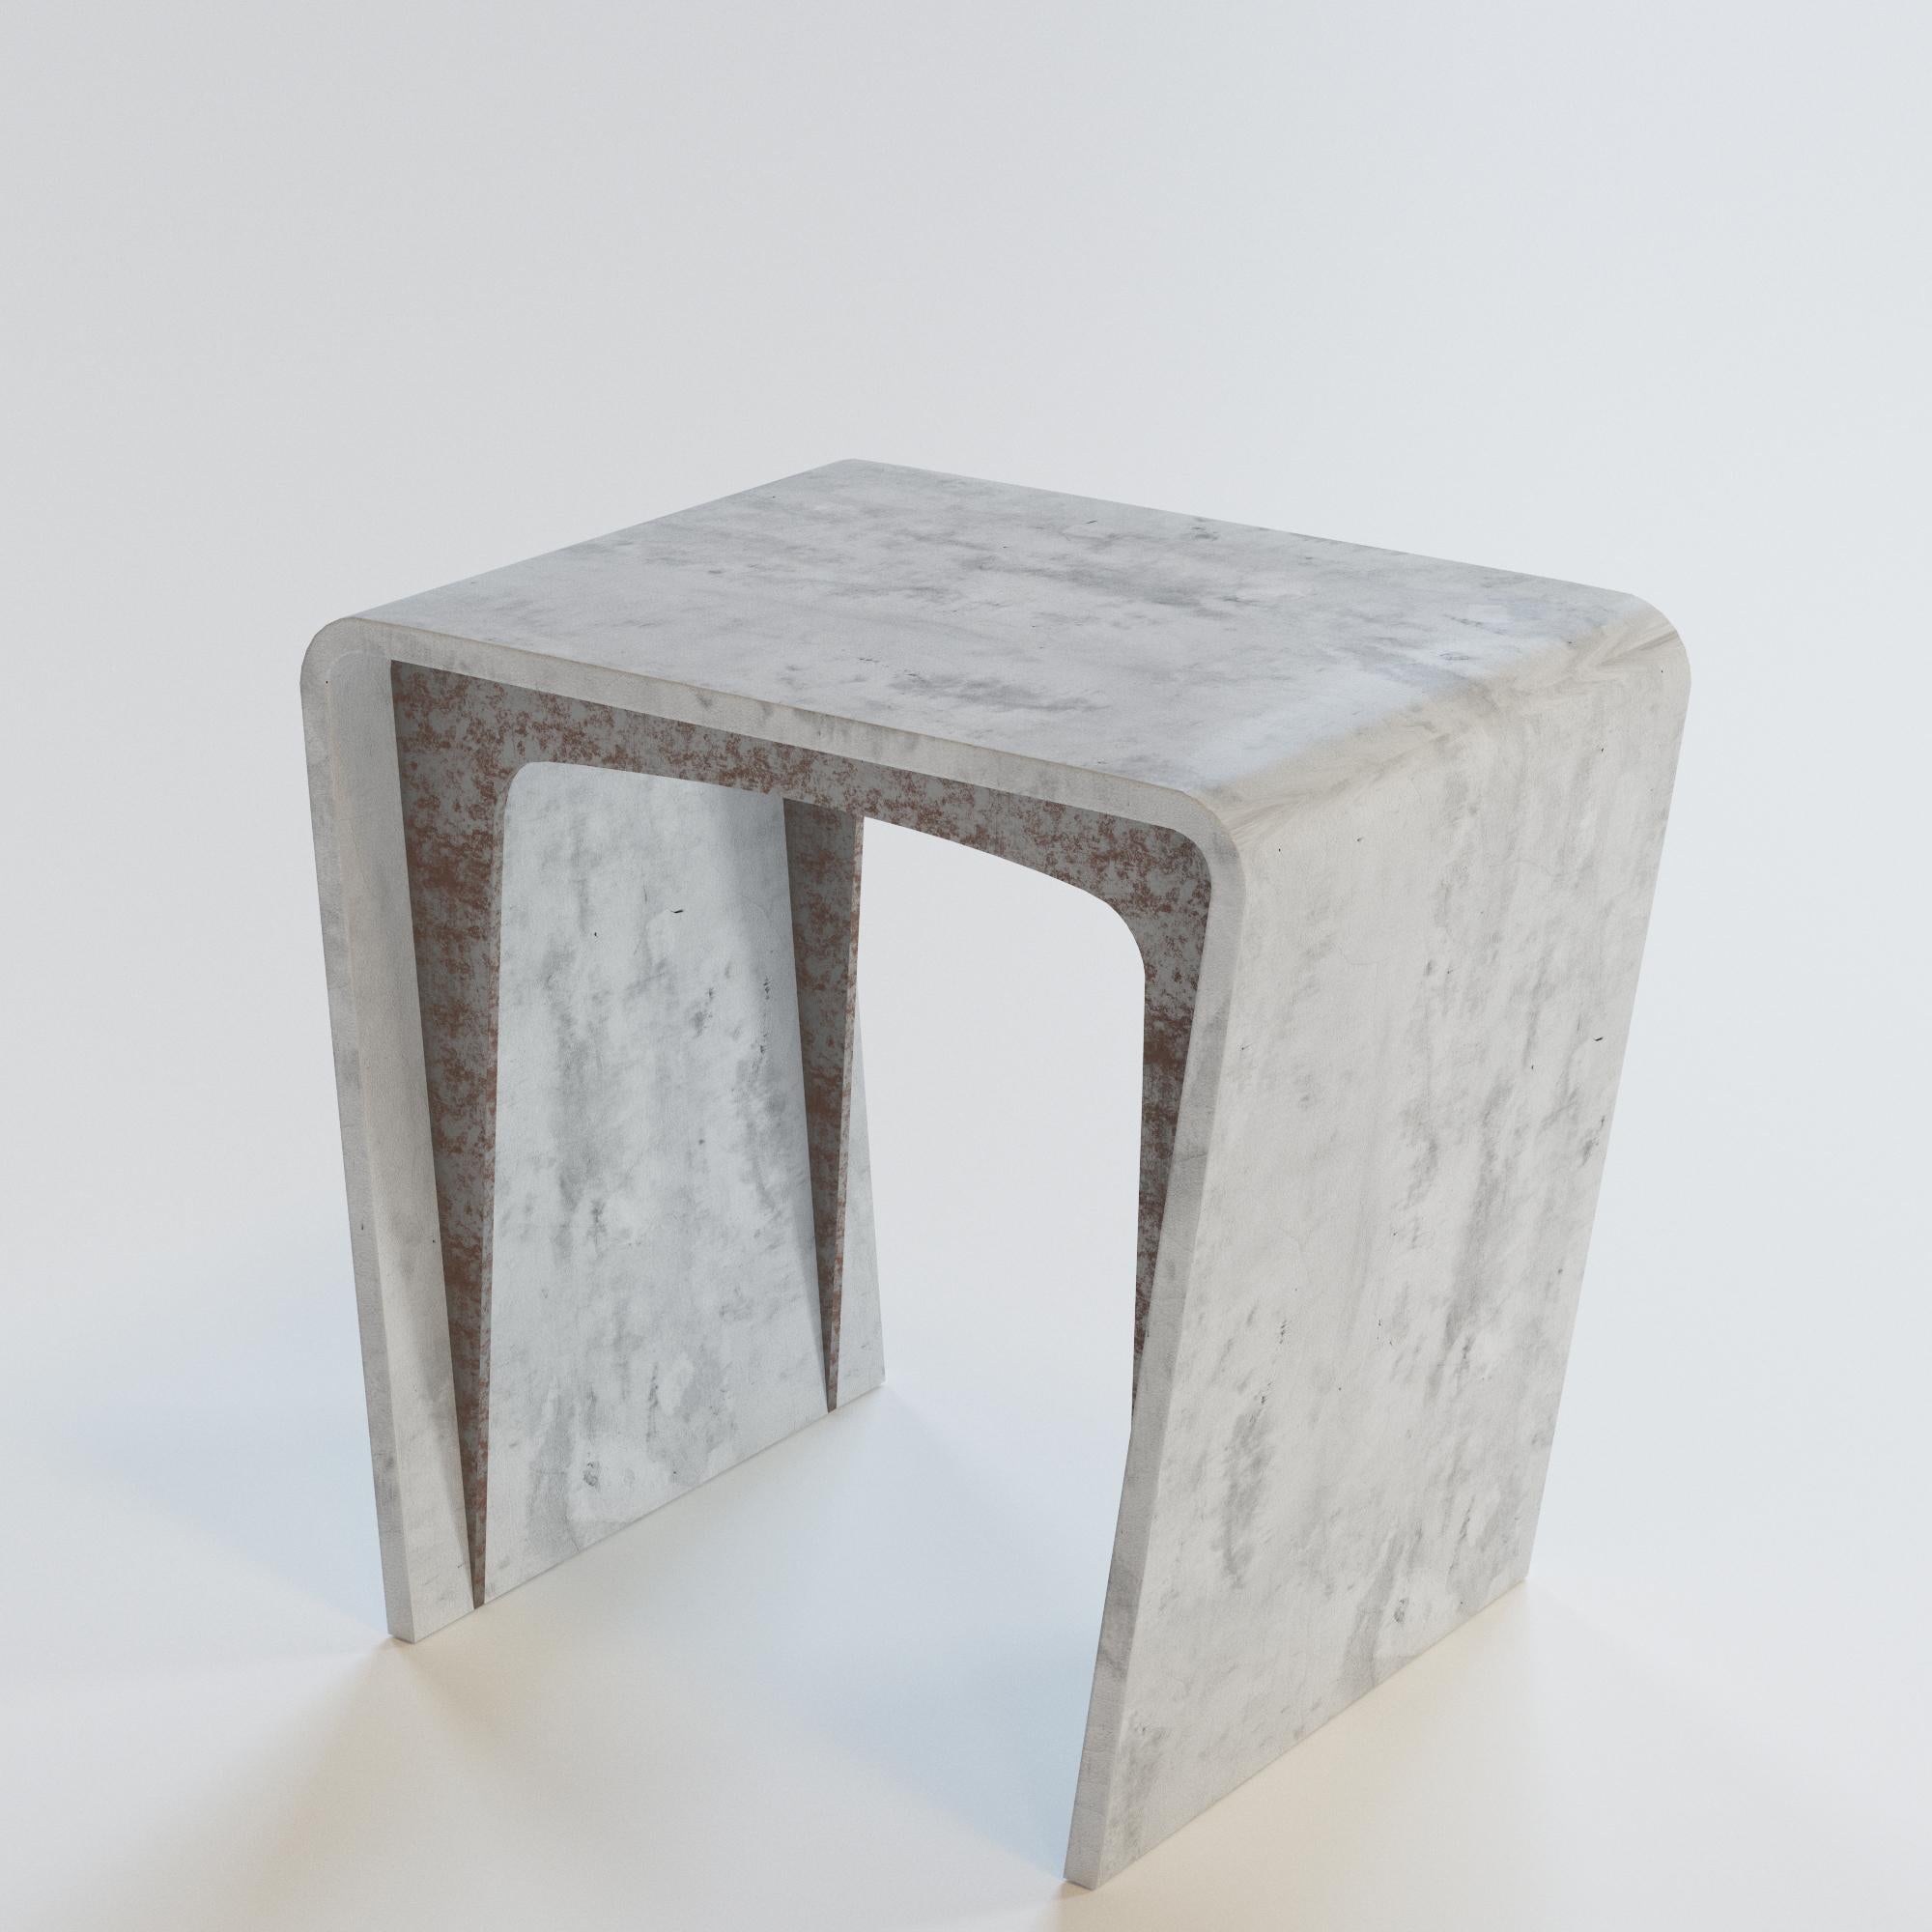 From the Concrete Canvas collection and designed for a boutique hotel in Mexico.
Handcrafted with Concrete canvas and patinated metal.
This coffee table is simple, elegant, elemental, and powerfully sculptural.

Available as a side table and a